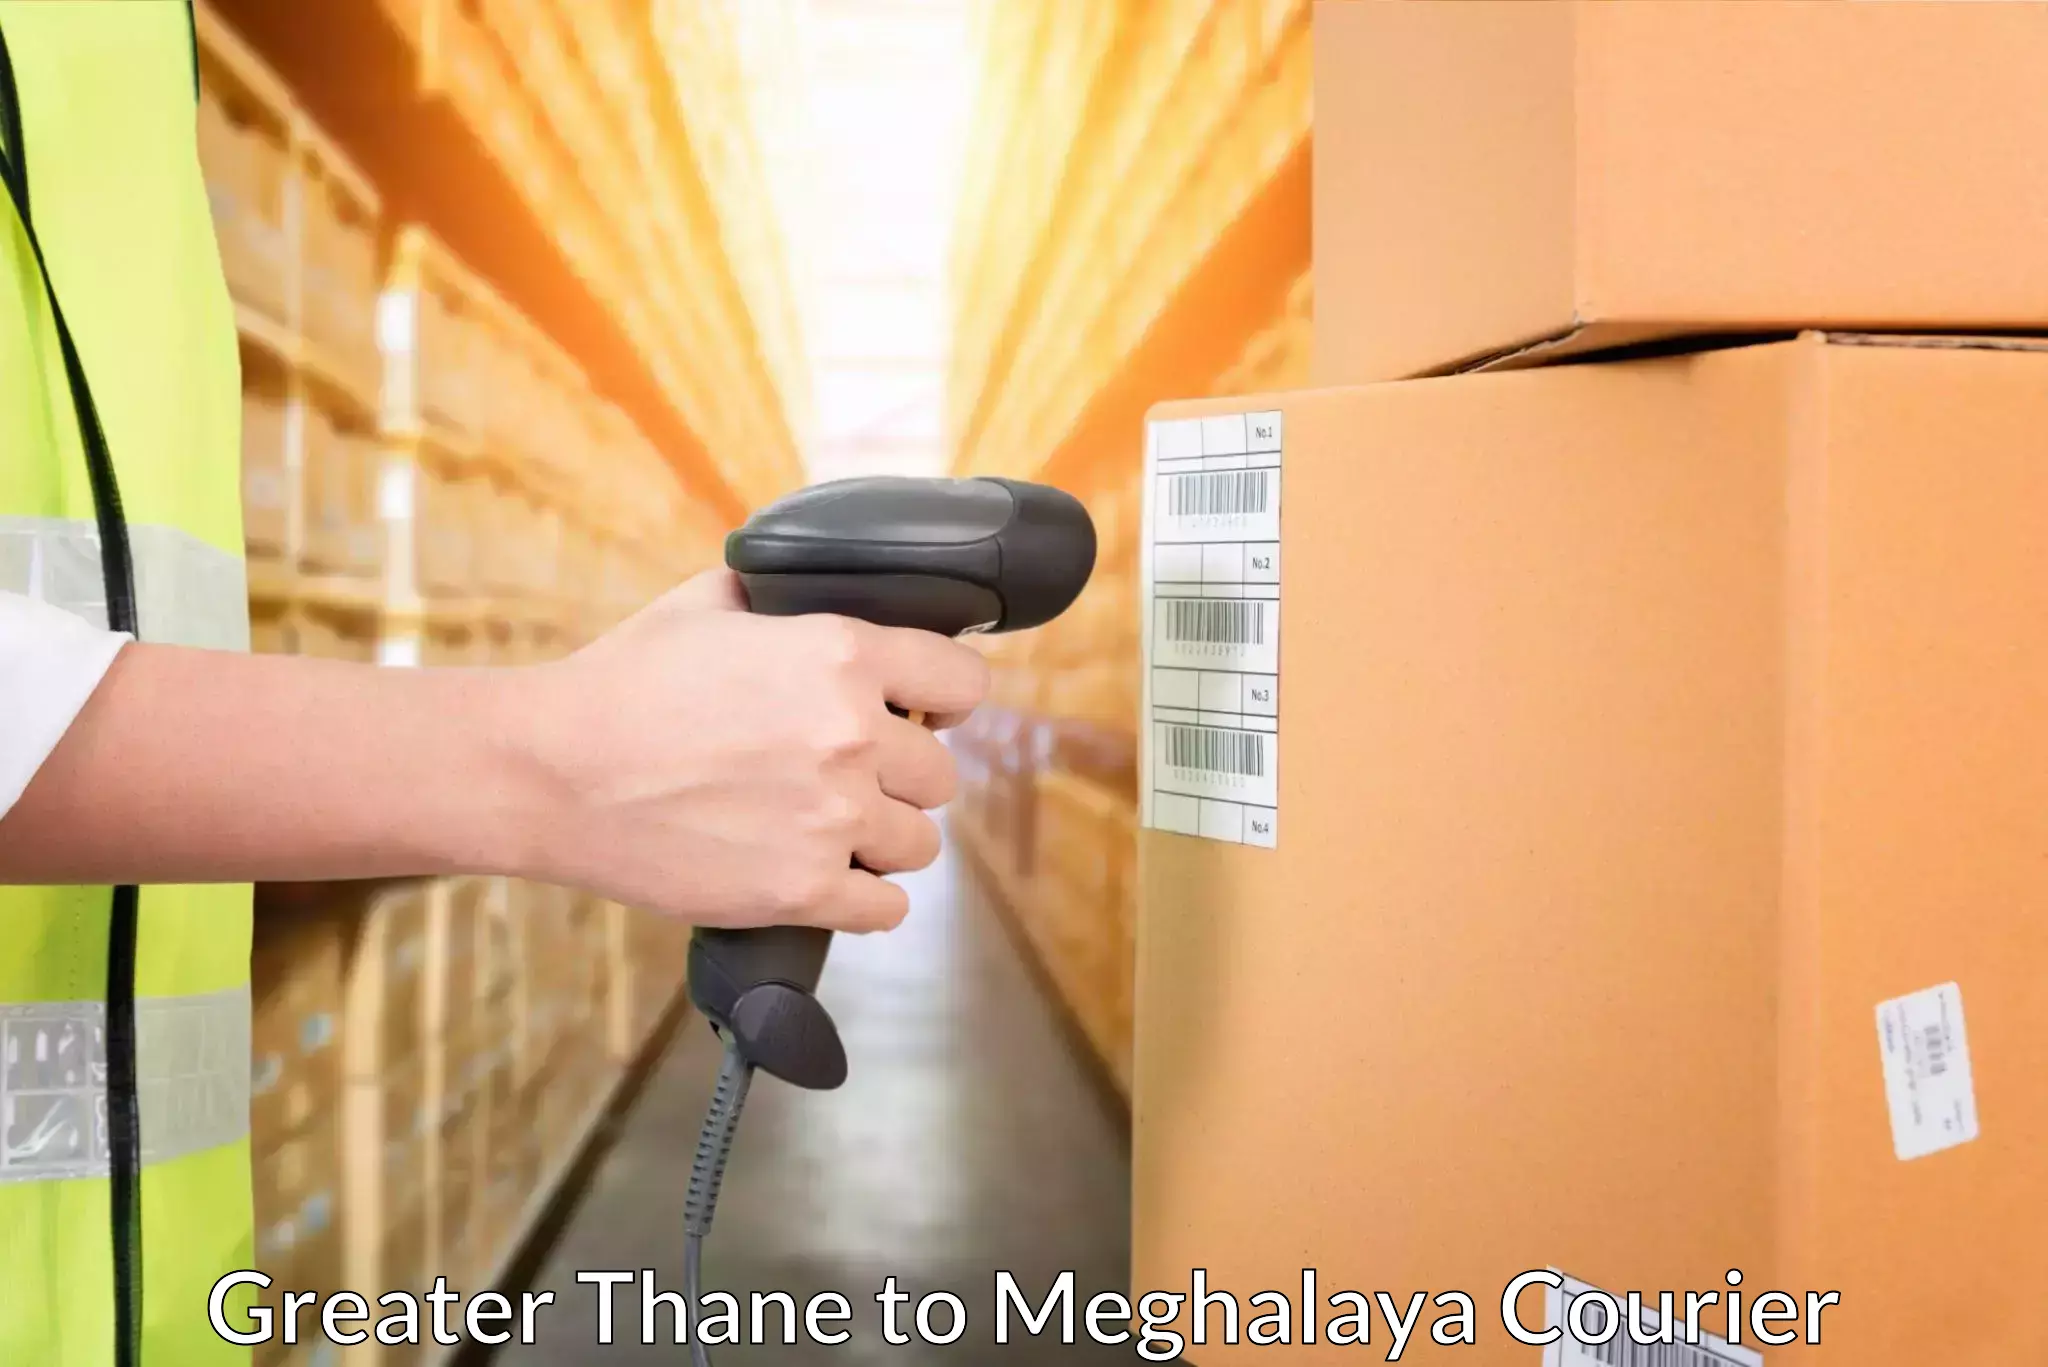 Nationwide delivery network Greater Thane to Meghalaya